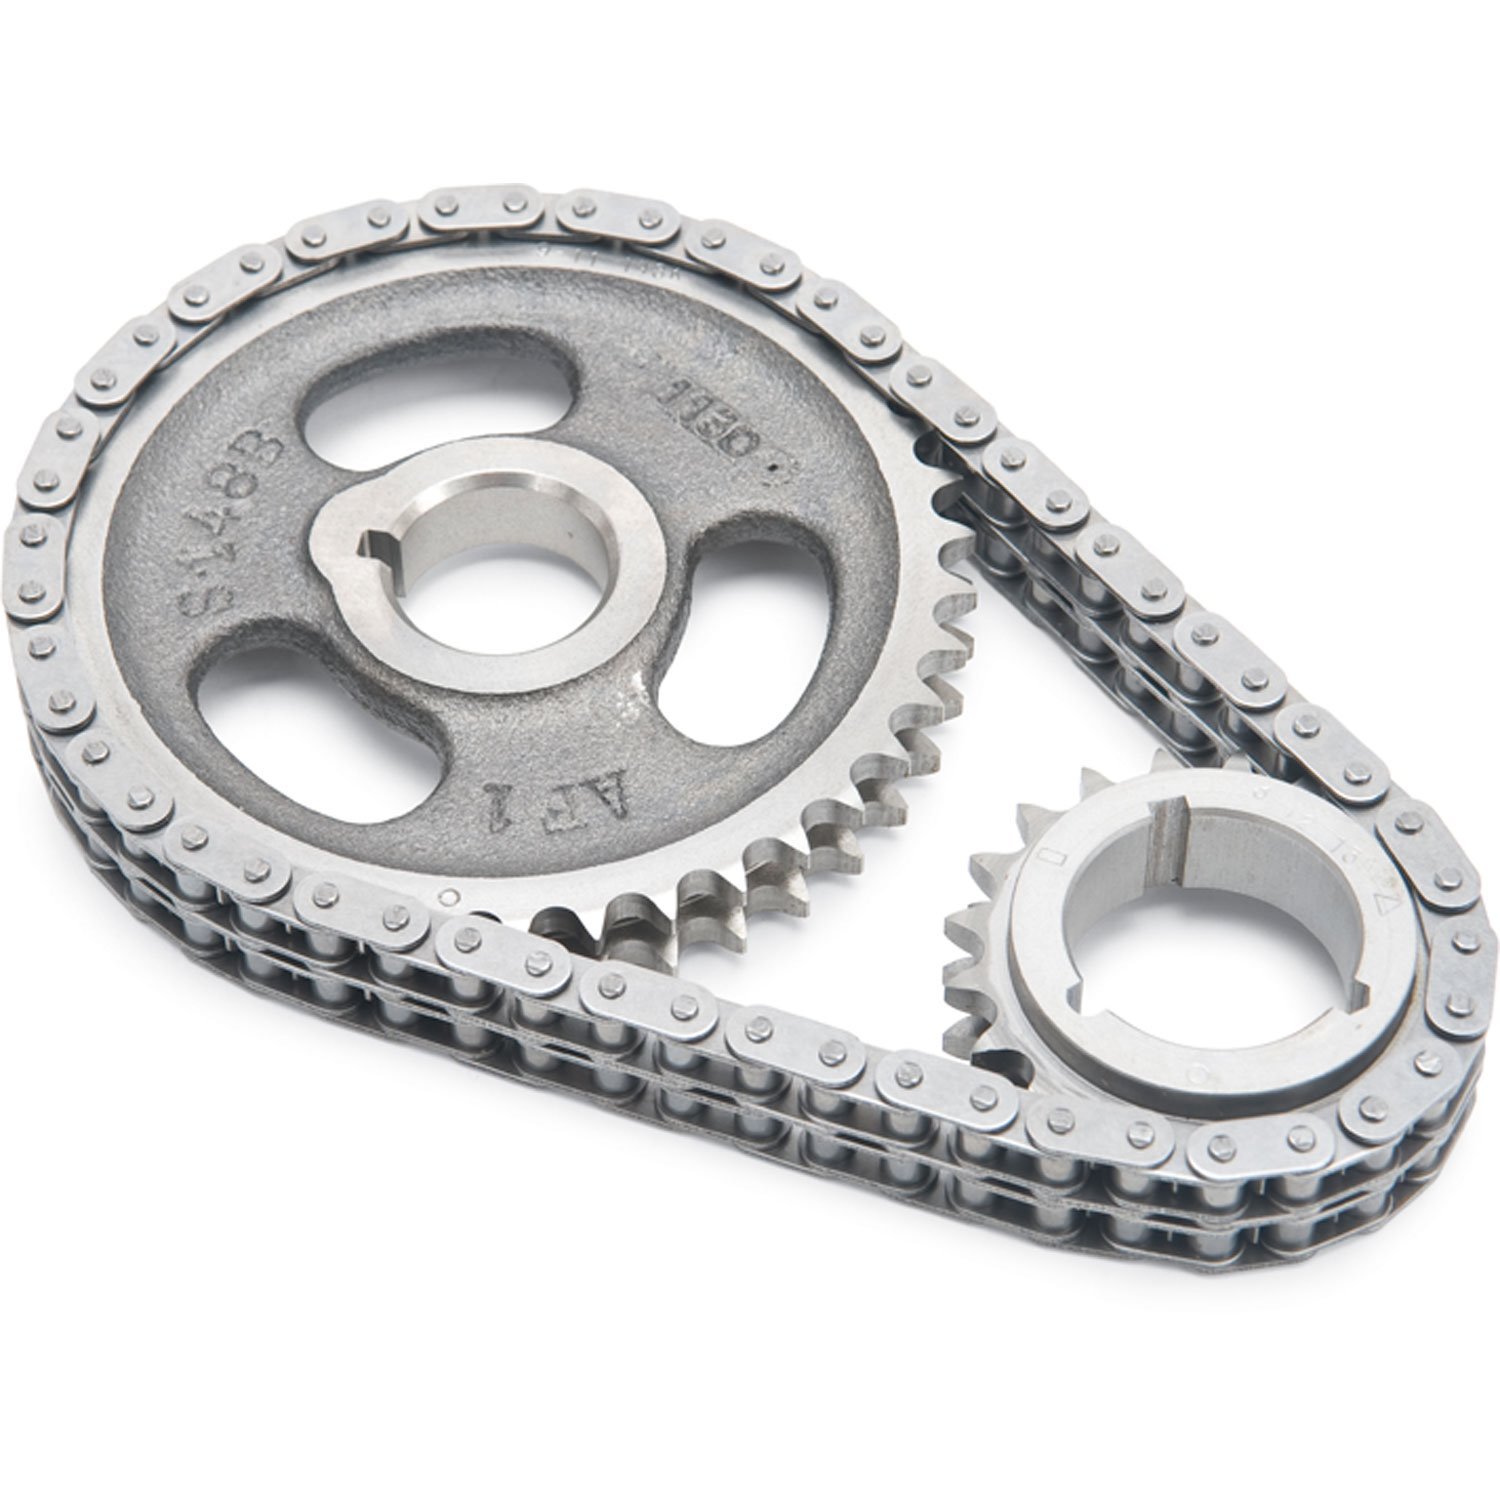 Edelbrock 7828: Performer-Link Timing Chain Set for Buick, Oldsmobile, and  Pontiac with 215 Aluminum V8 and 231 V6 JEGS